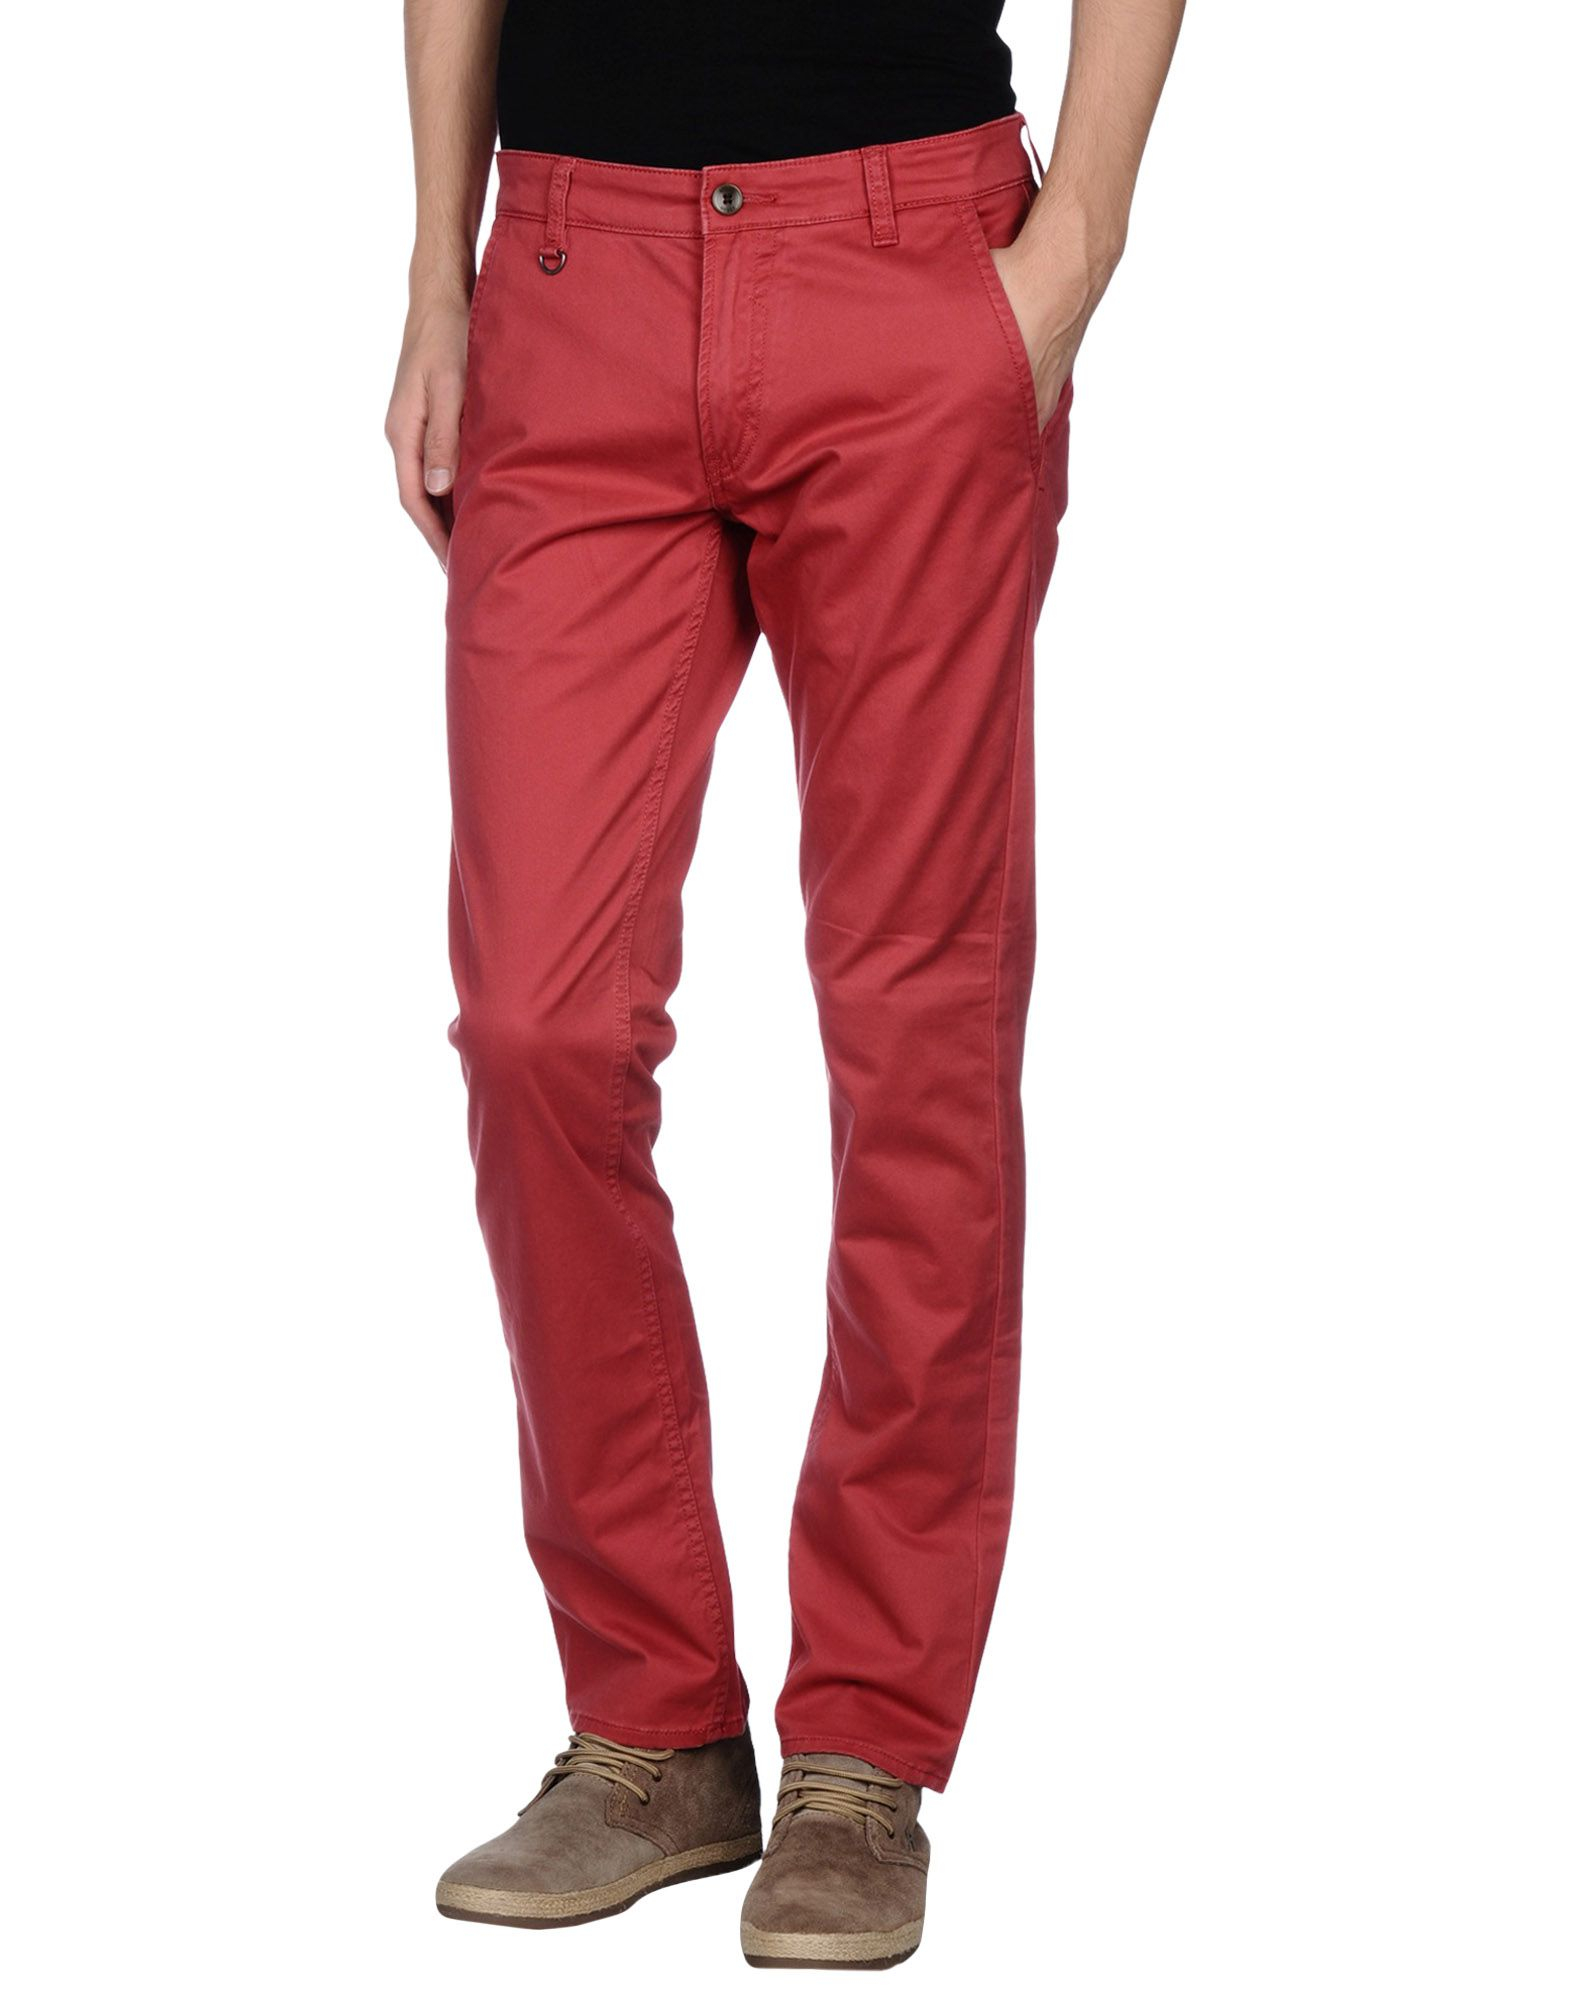 Lyst - Guess Casual Trouser in Red for Men